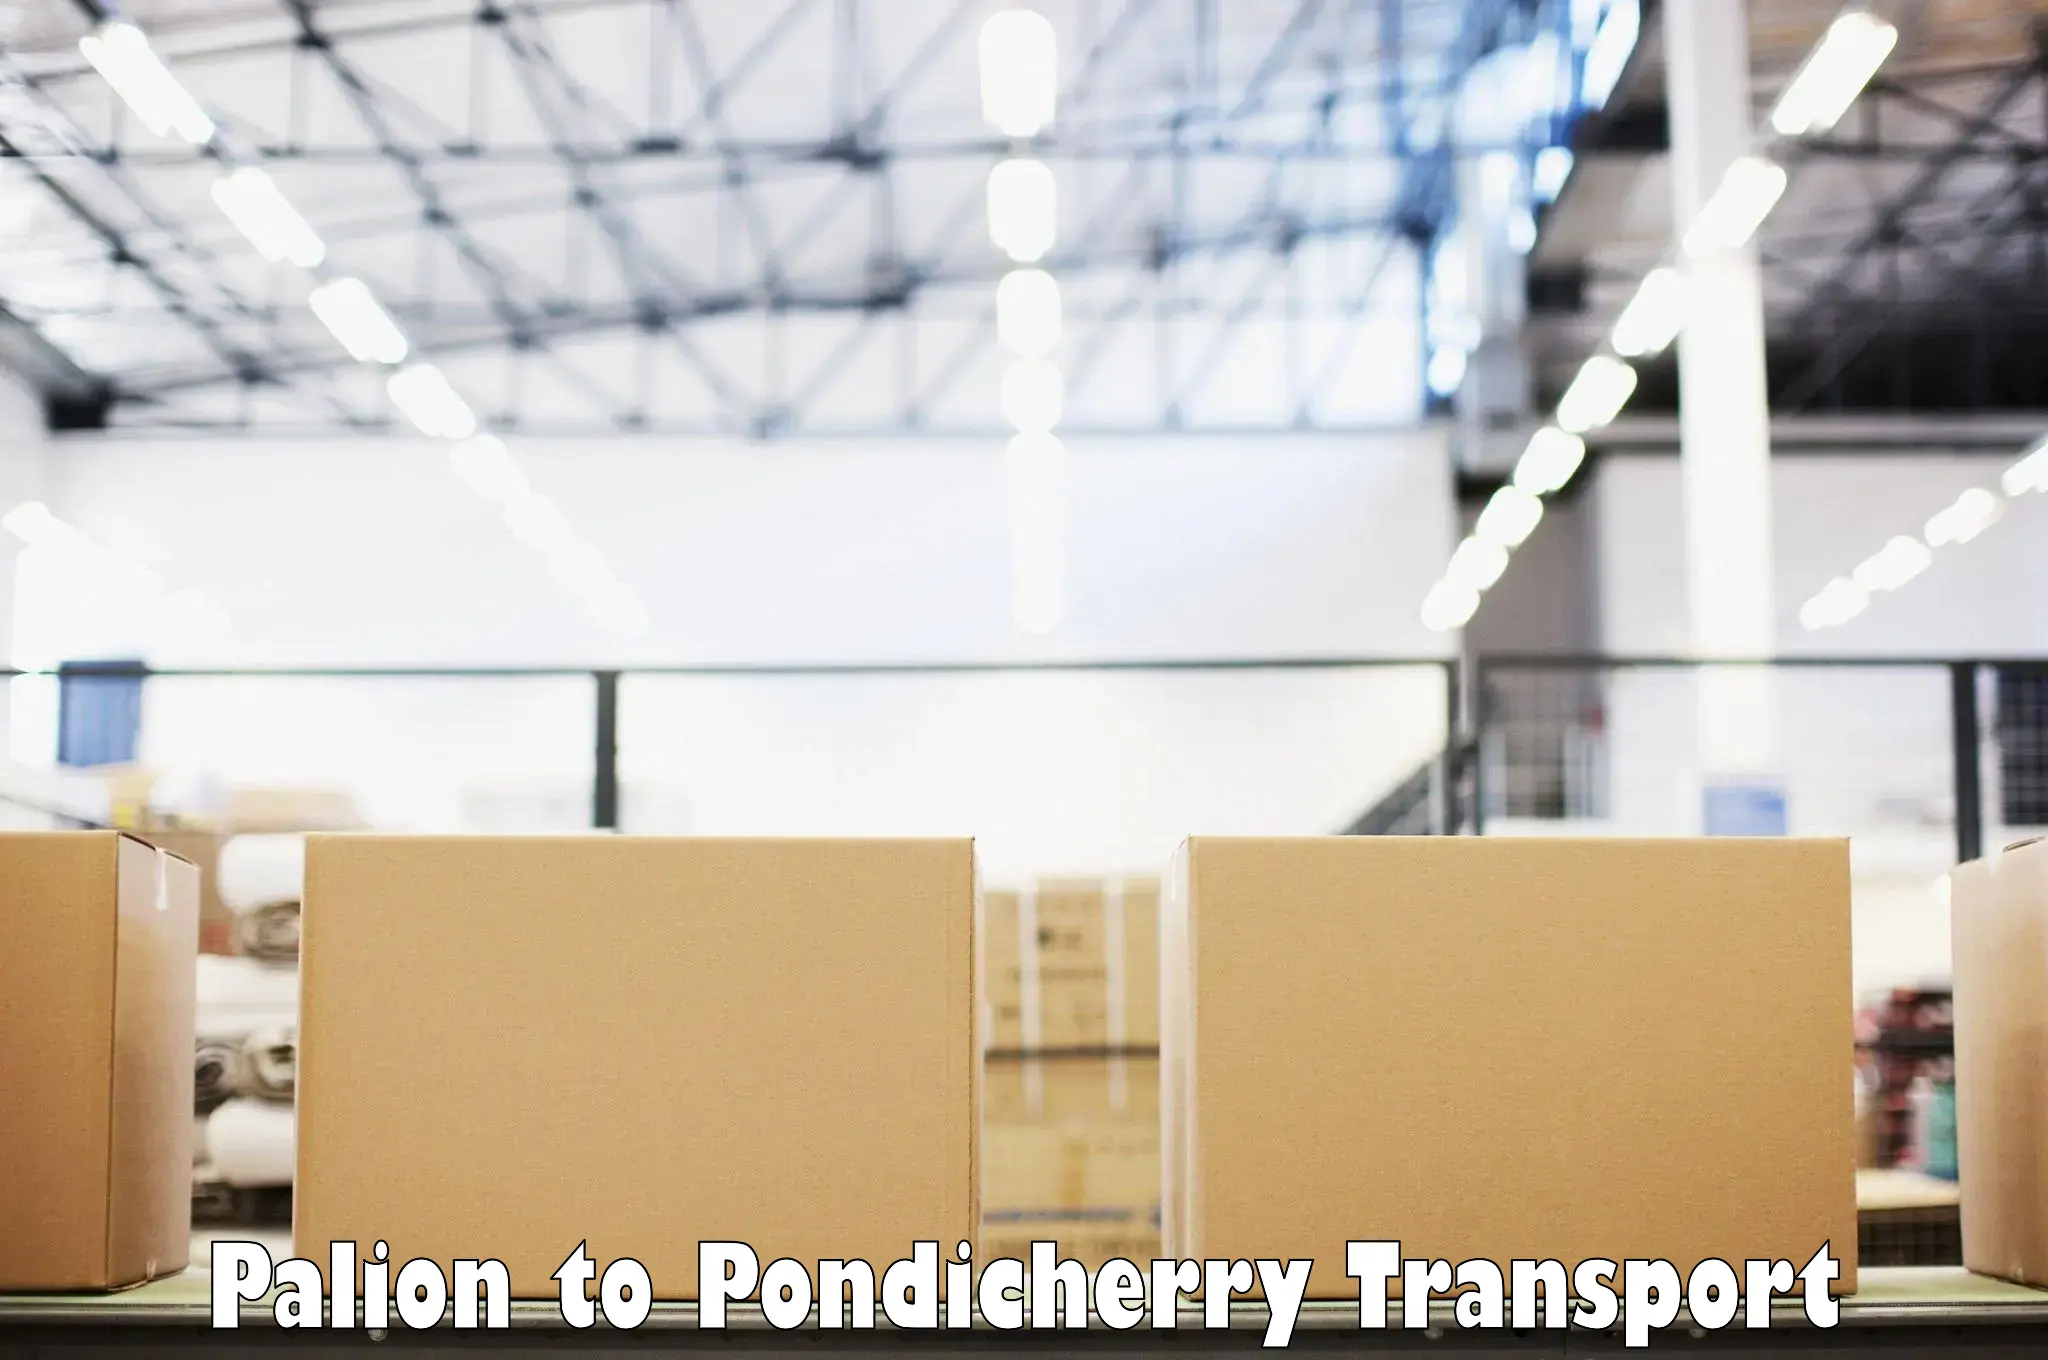 Container transport service Palion to Pondicherry